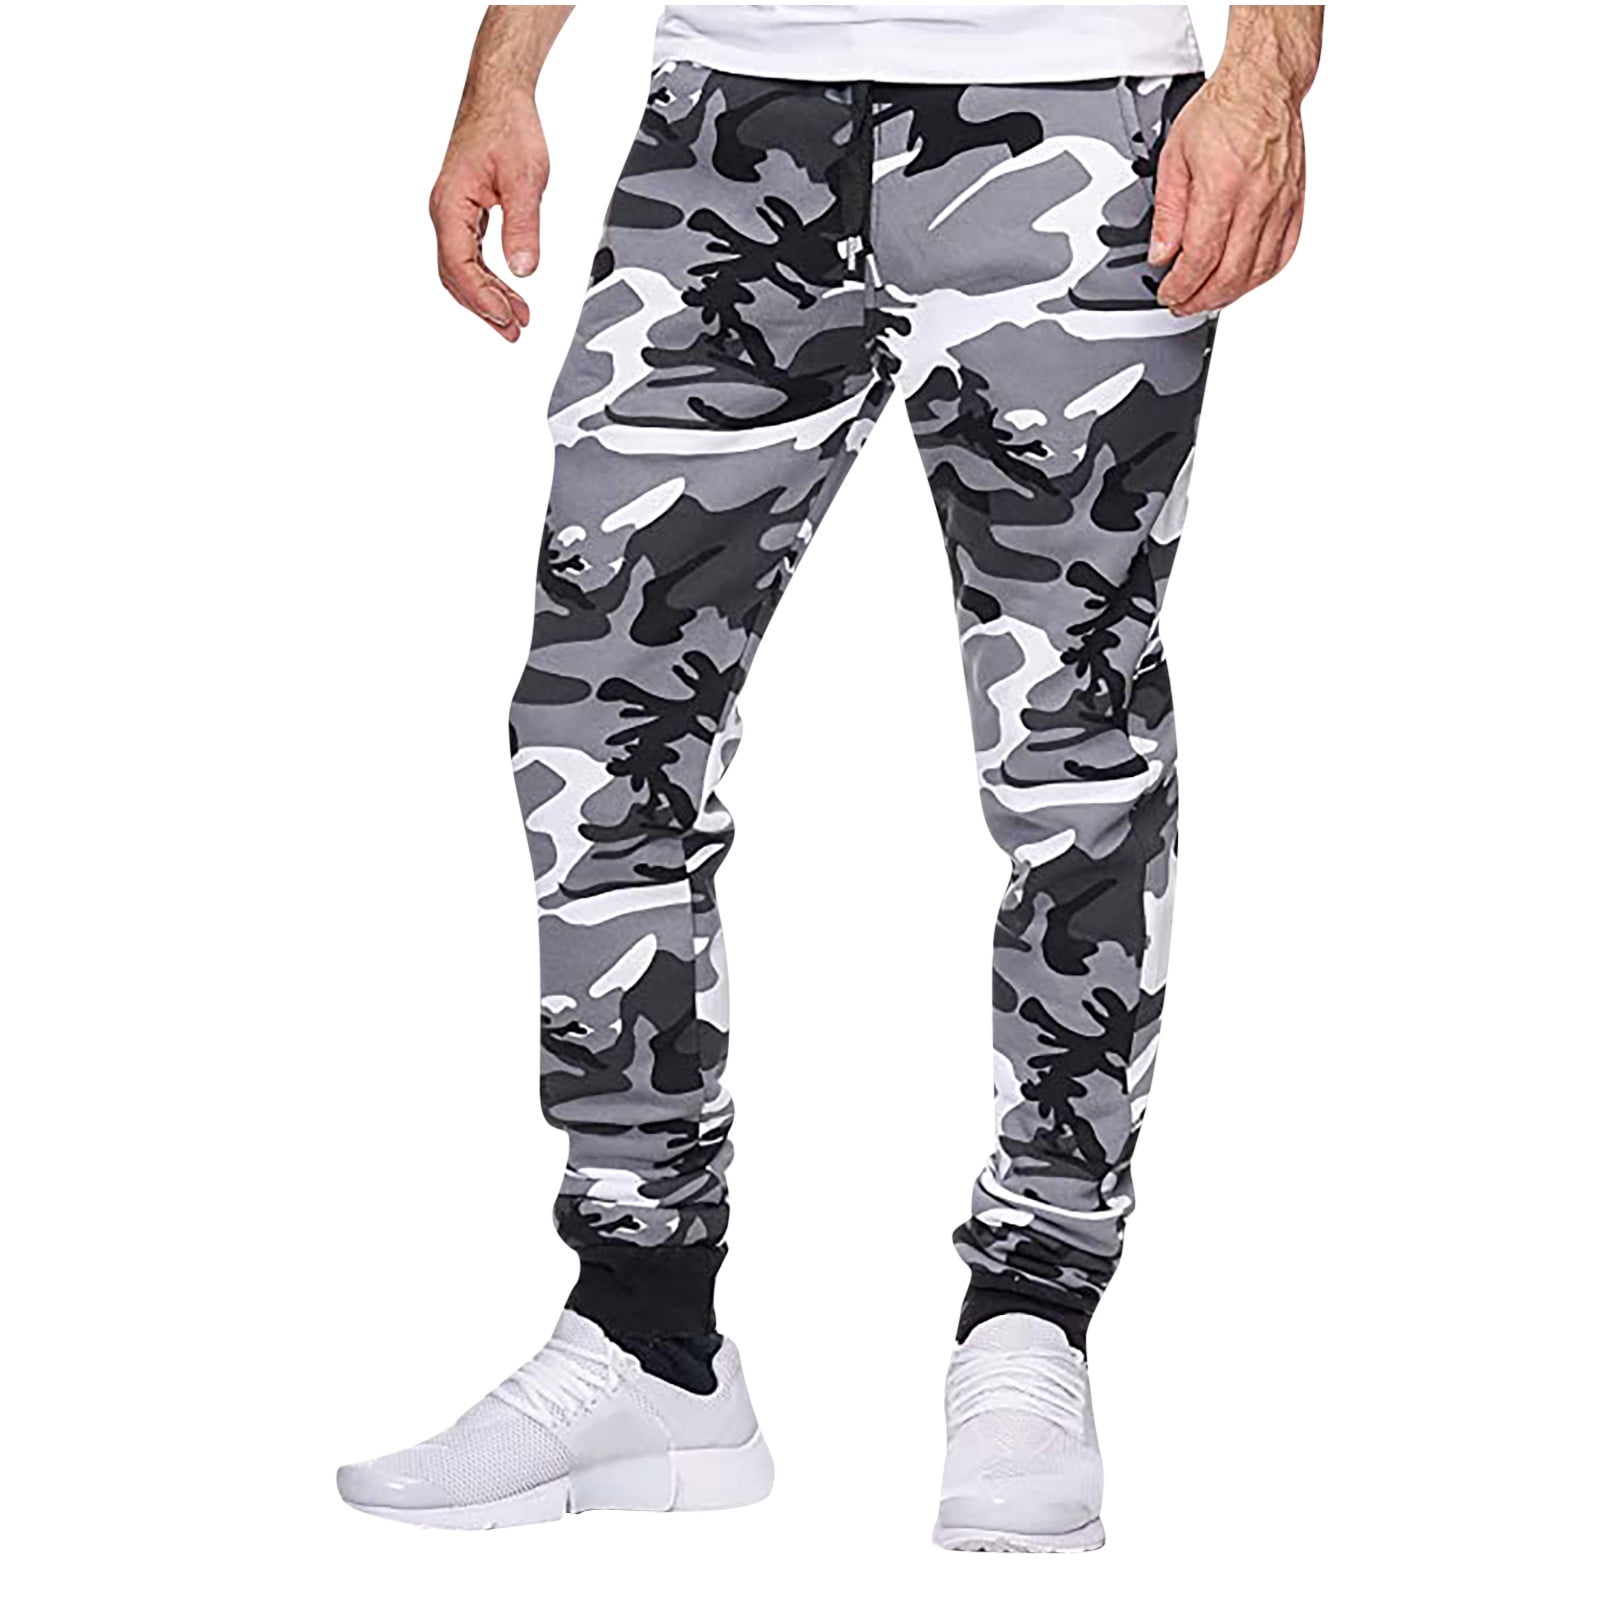 symoid Mens Athletic Sweatpants- Camouflage Tracksuit Bottoms Jogging ...